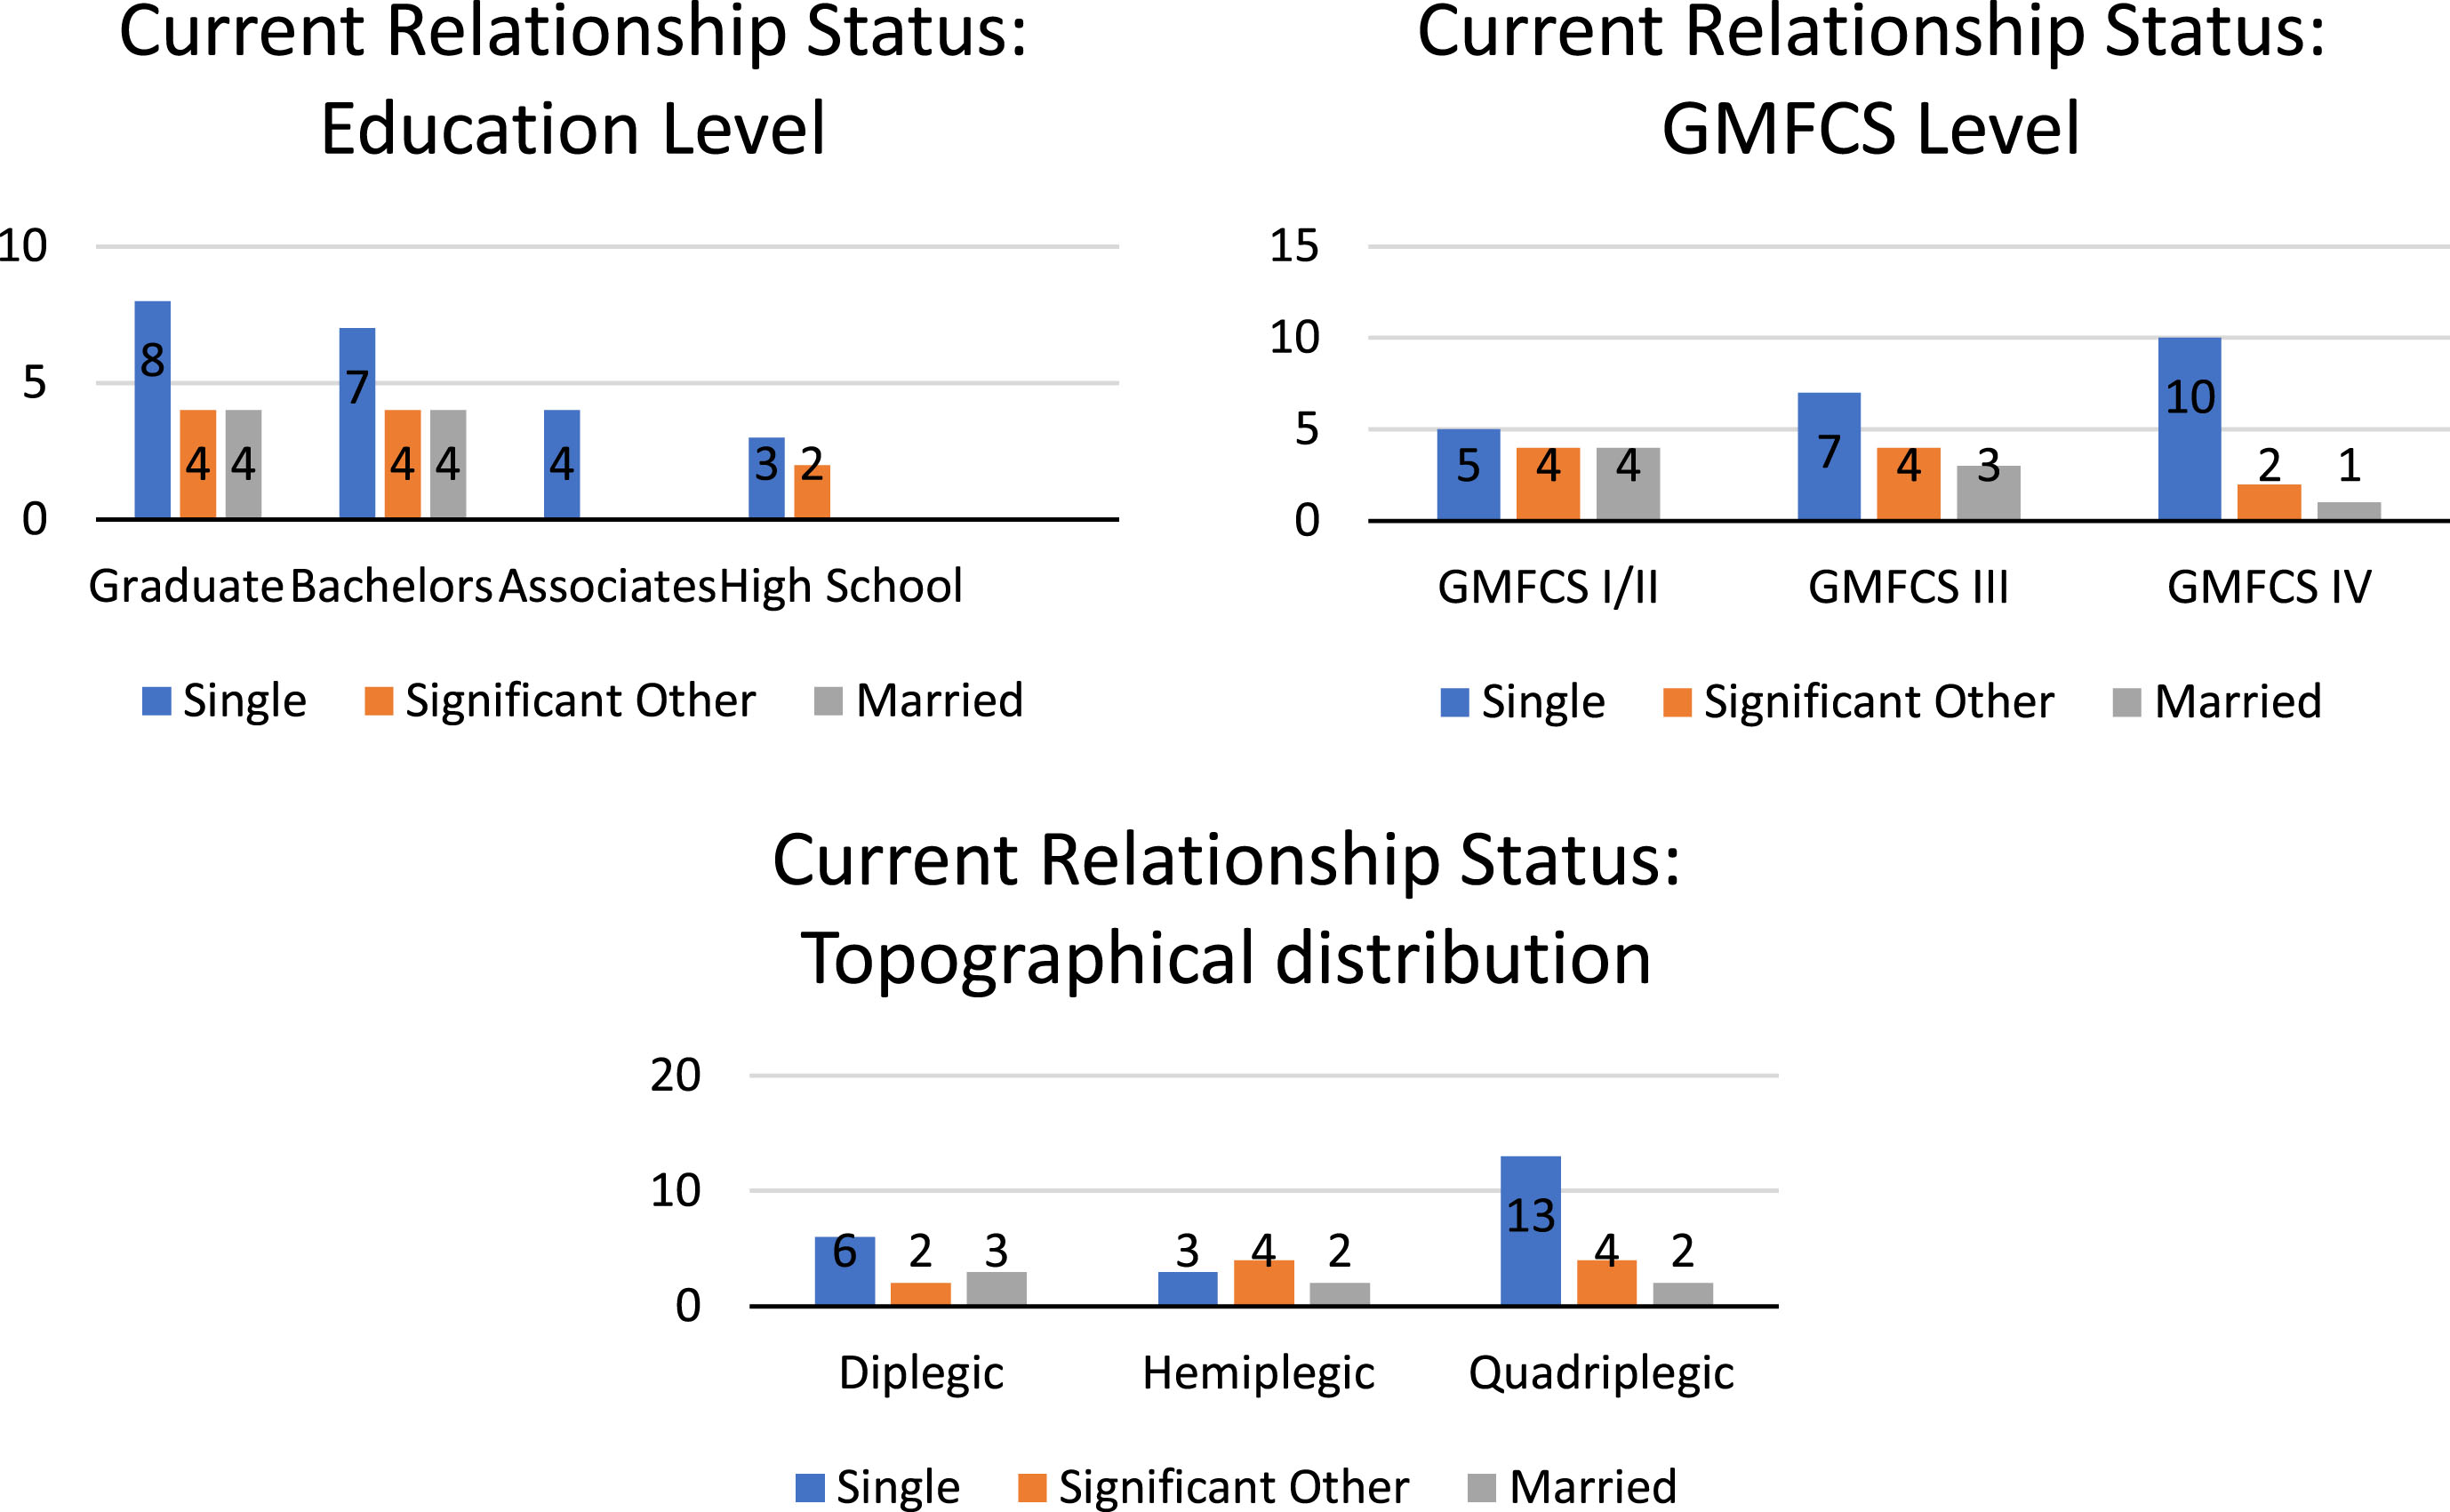 Current relationship status by (a) education level, (b) Gross Motor Function Classification System (GMFCS) level, and (c) topographical distribution.